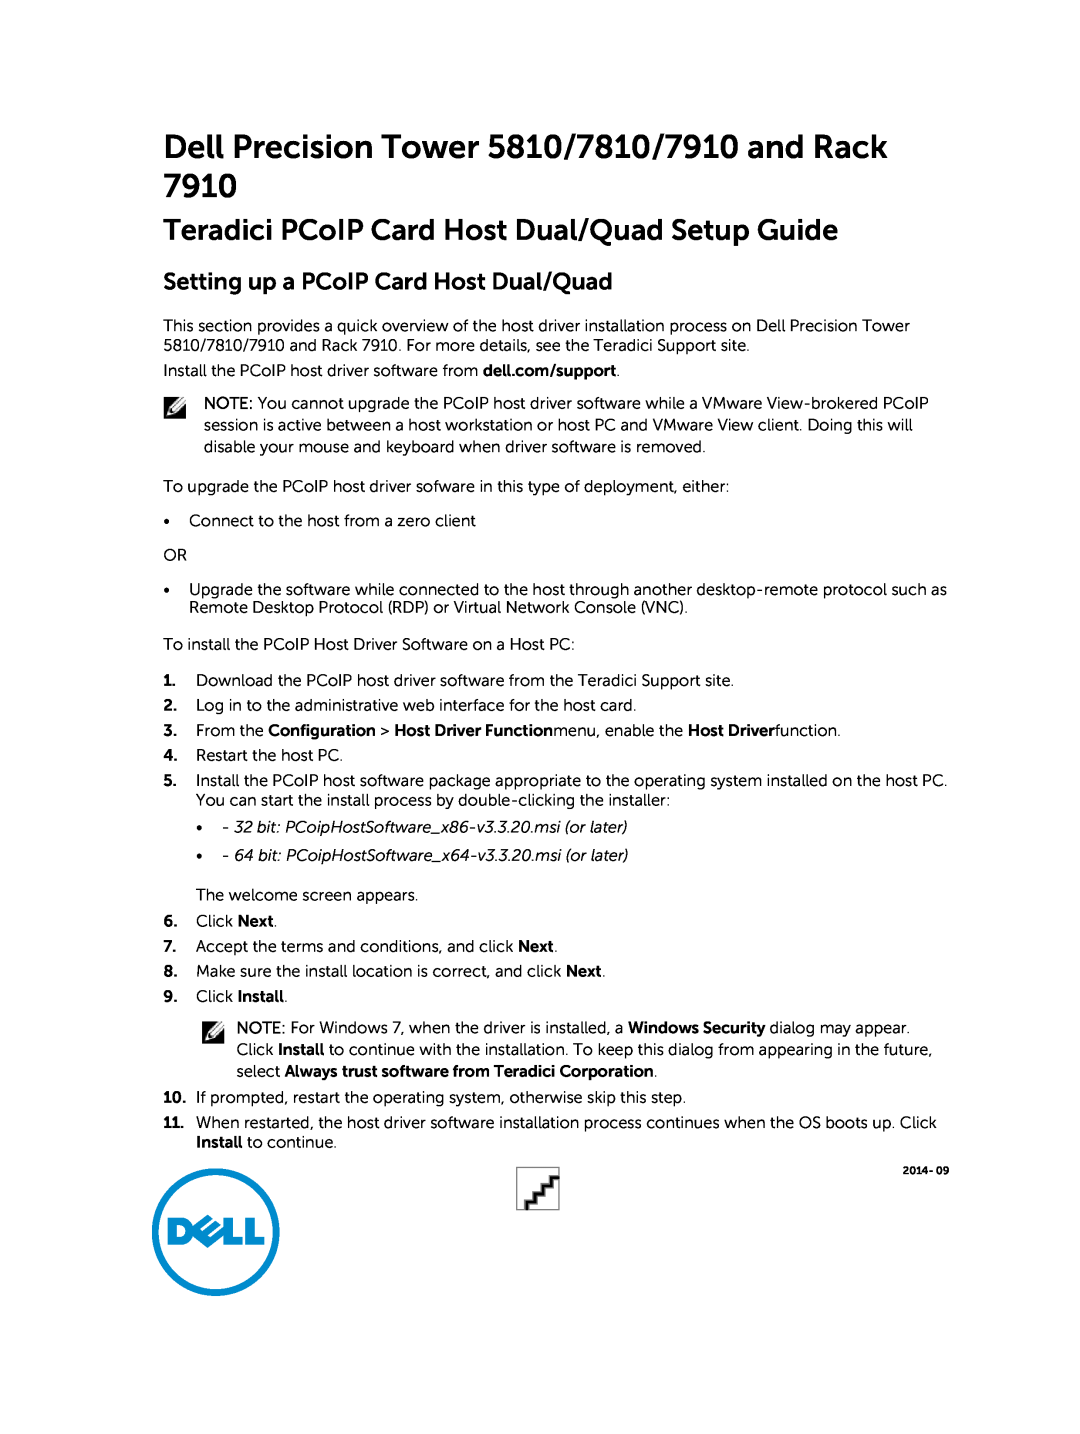 Dell setup guide Teradici PCoIP Card Host Dual/Quad Setup Guide, Dell Precision Tower 5810/7810/7910 and Rack 